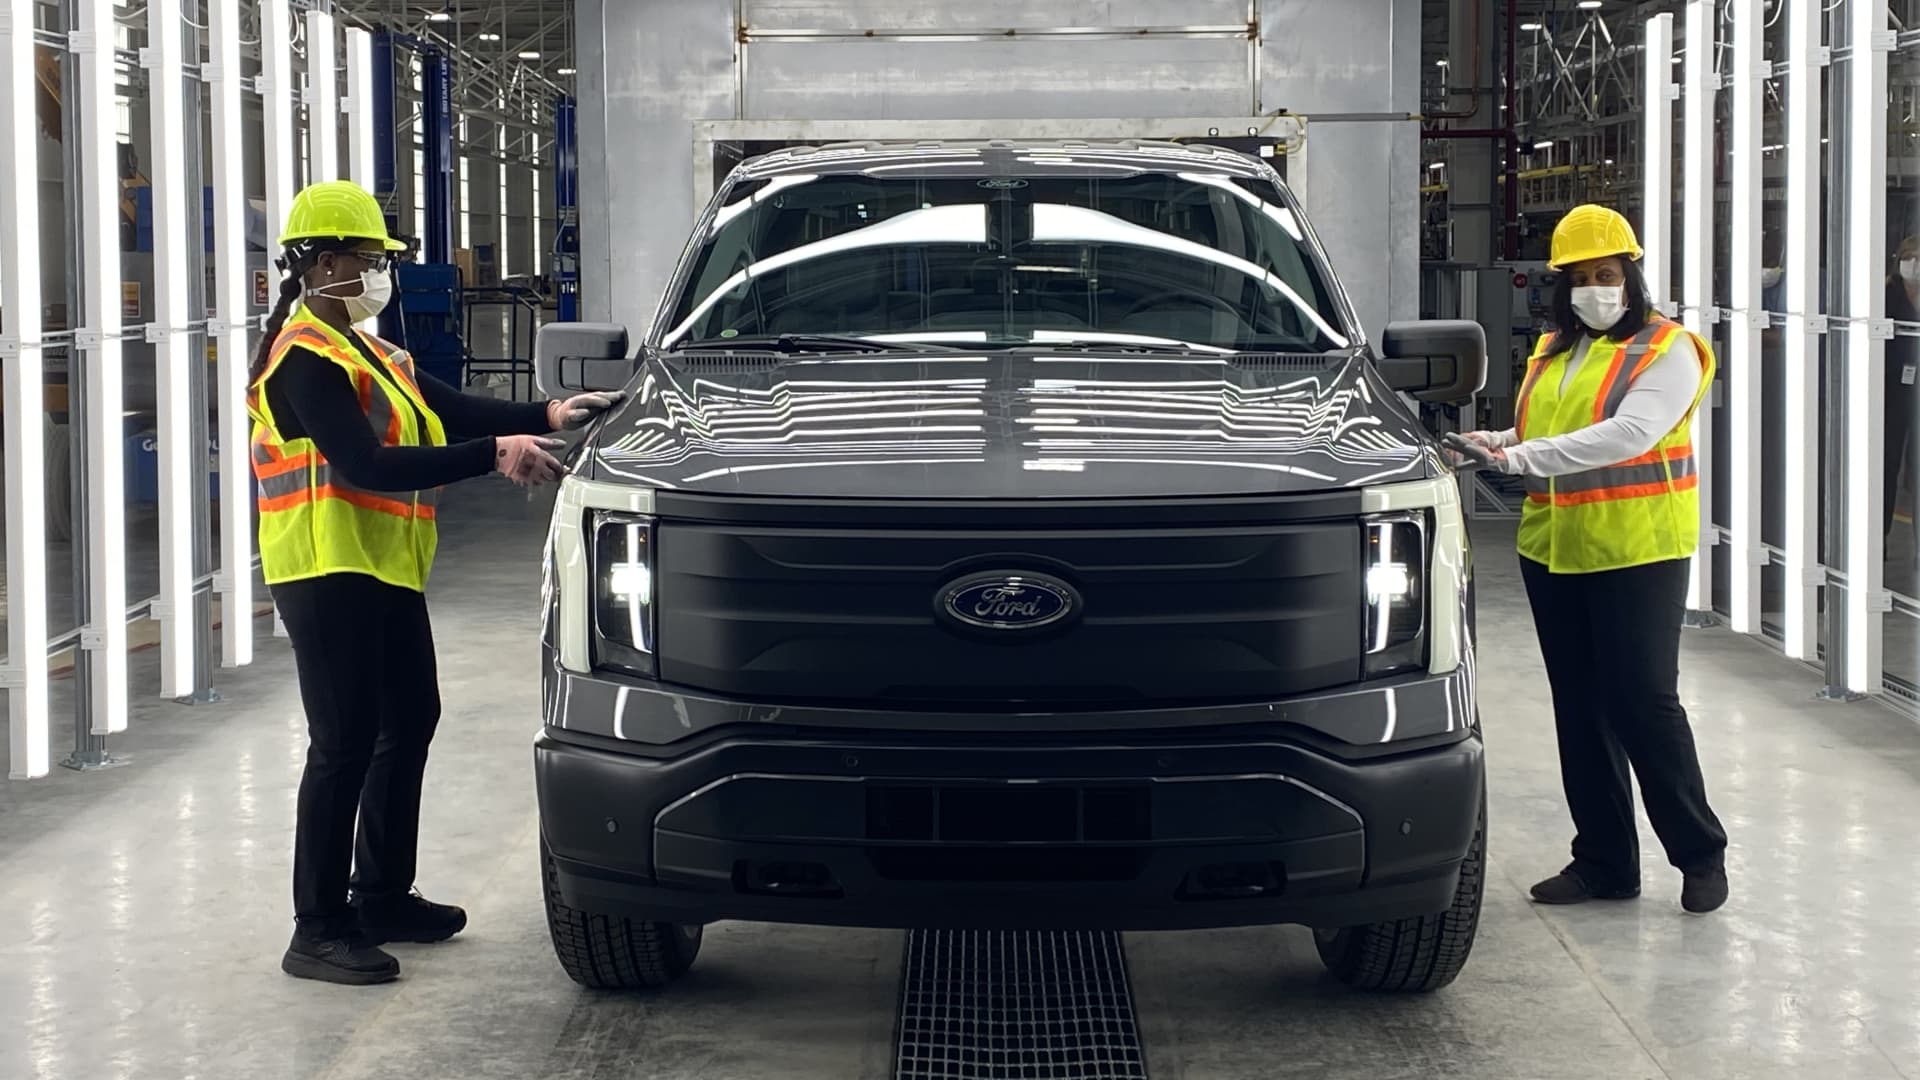 Ford has started initial pre-production of its electric F-150 Lightning pickup truck at a new plant in Dearborn, Mich.